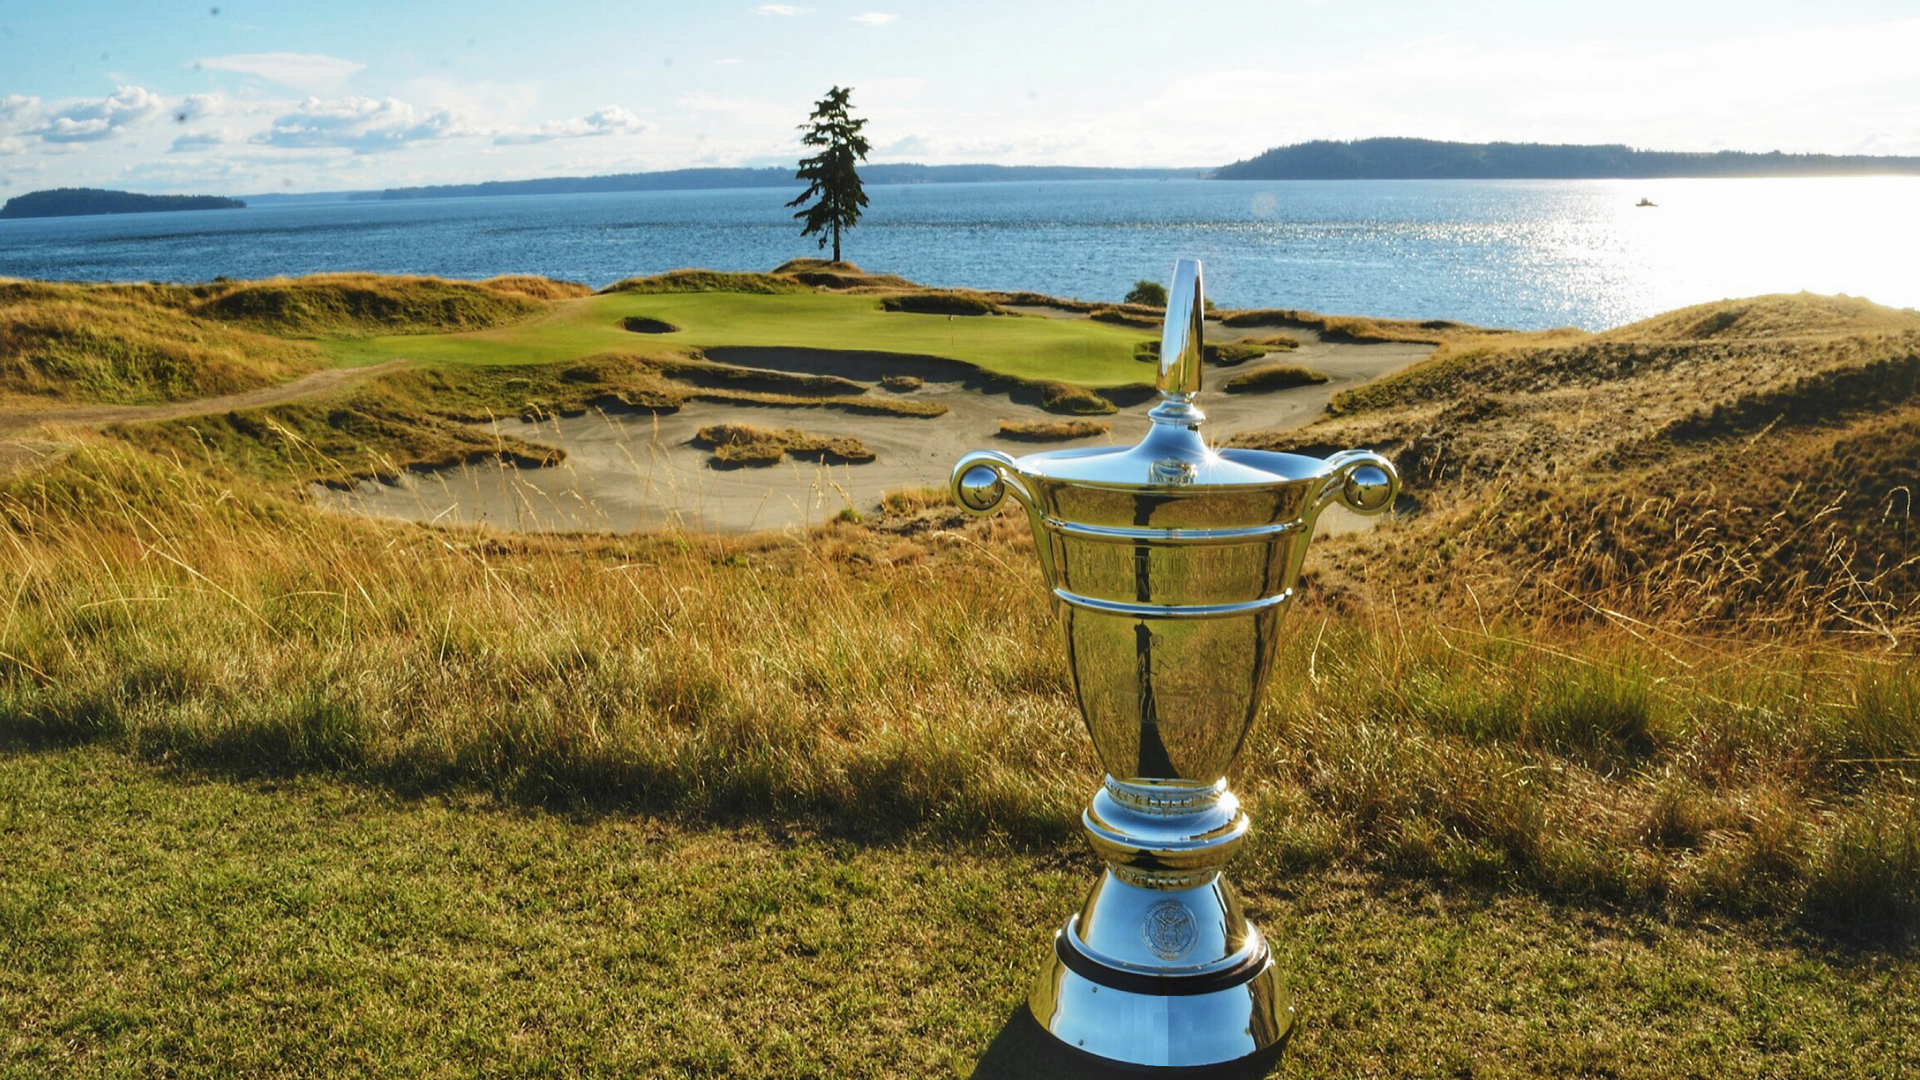 Chambers Bay, Host Site of the 2019 Men’s U.S. Amateur Four-Ball Championship